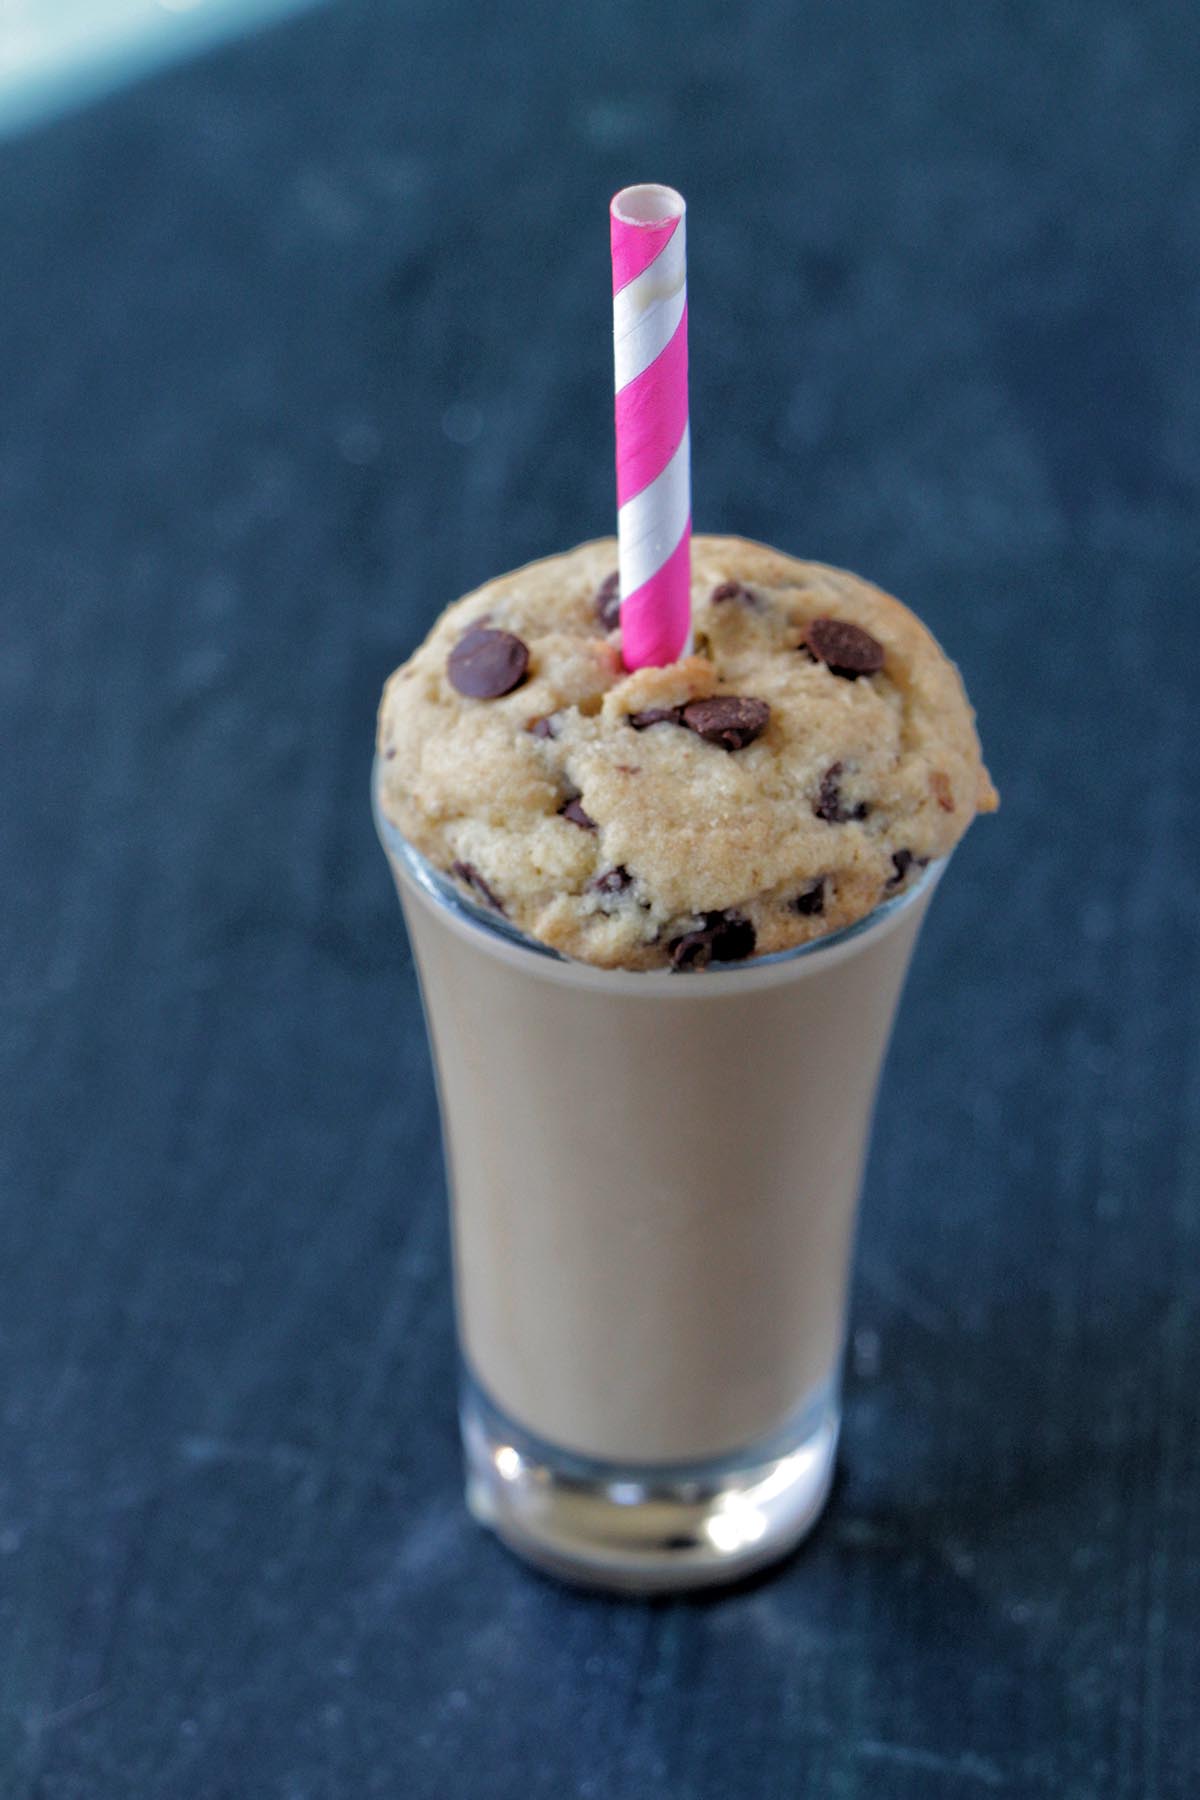 shot glass topped with a chocolate chip cookie and straw.